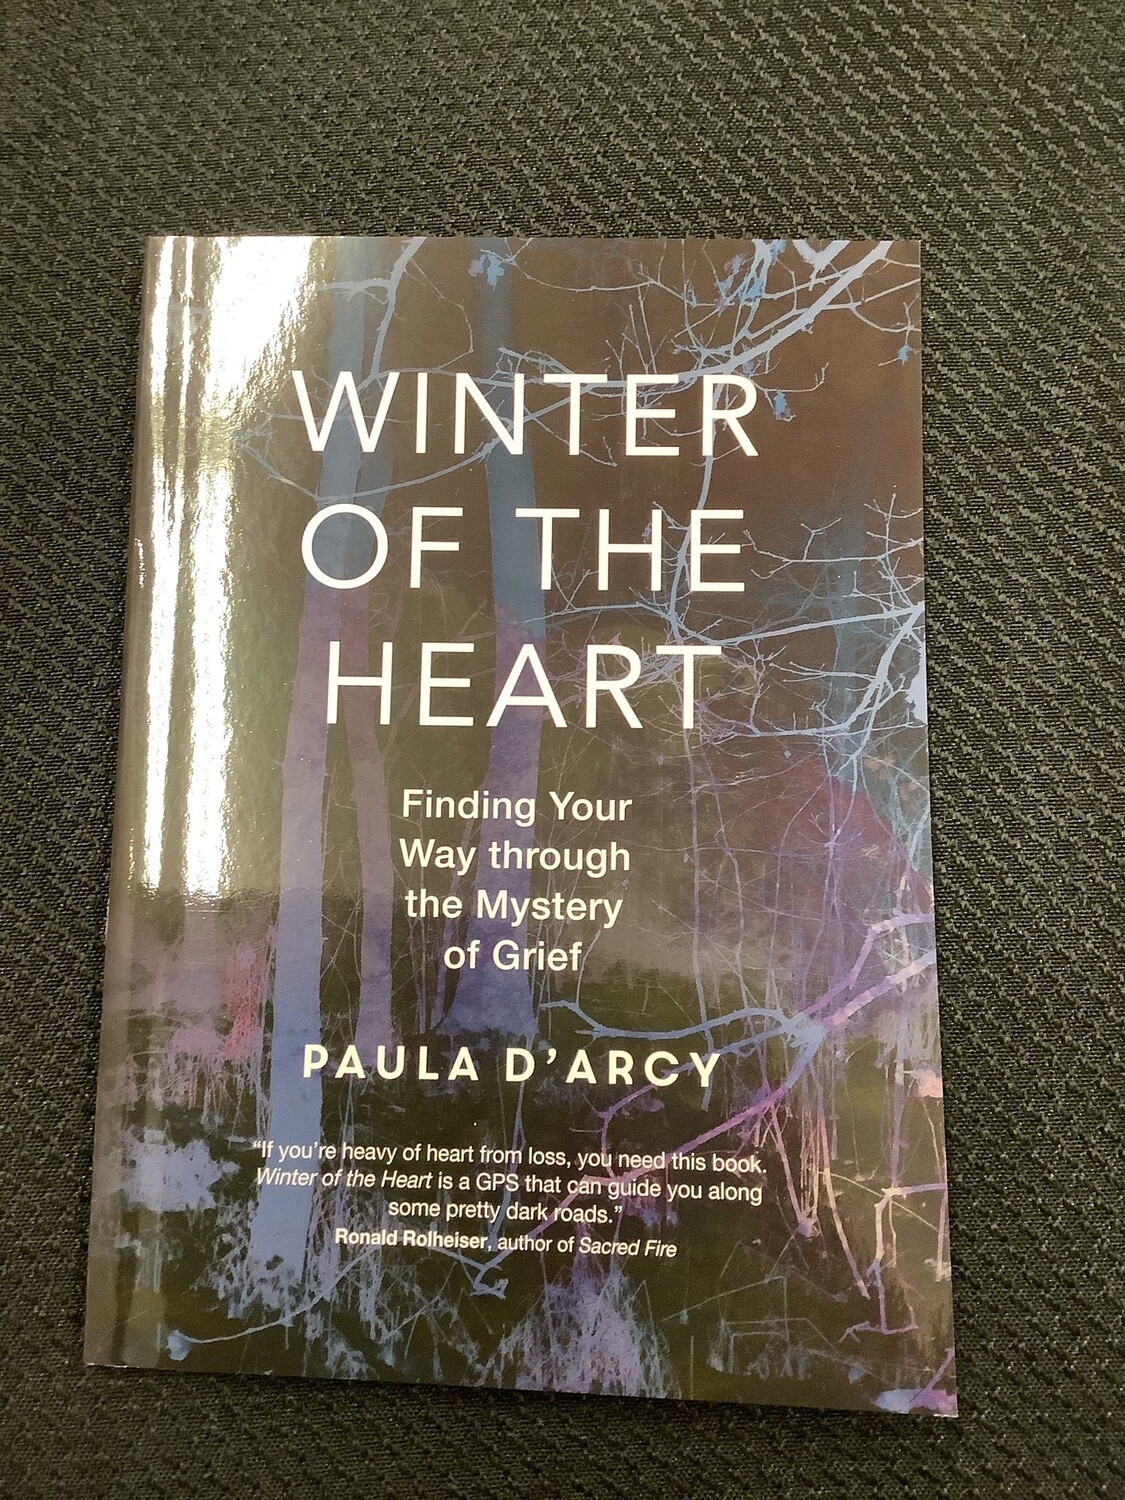 Winter Of The Heart Finding Your Way Through the Mystery of Grief - Paula D’Arcy